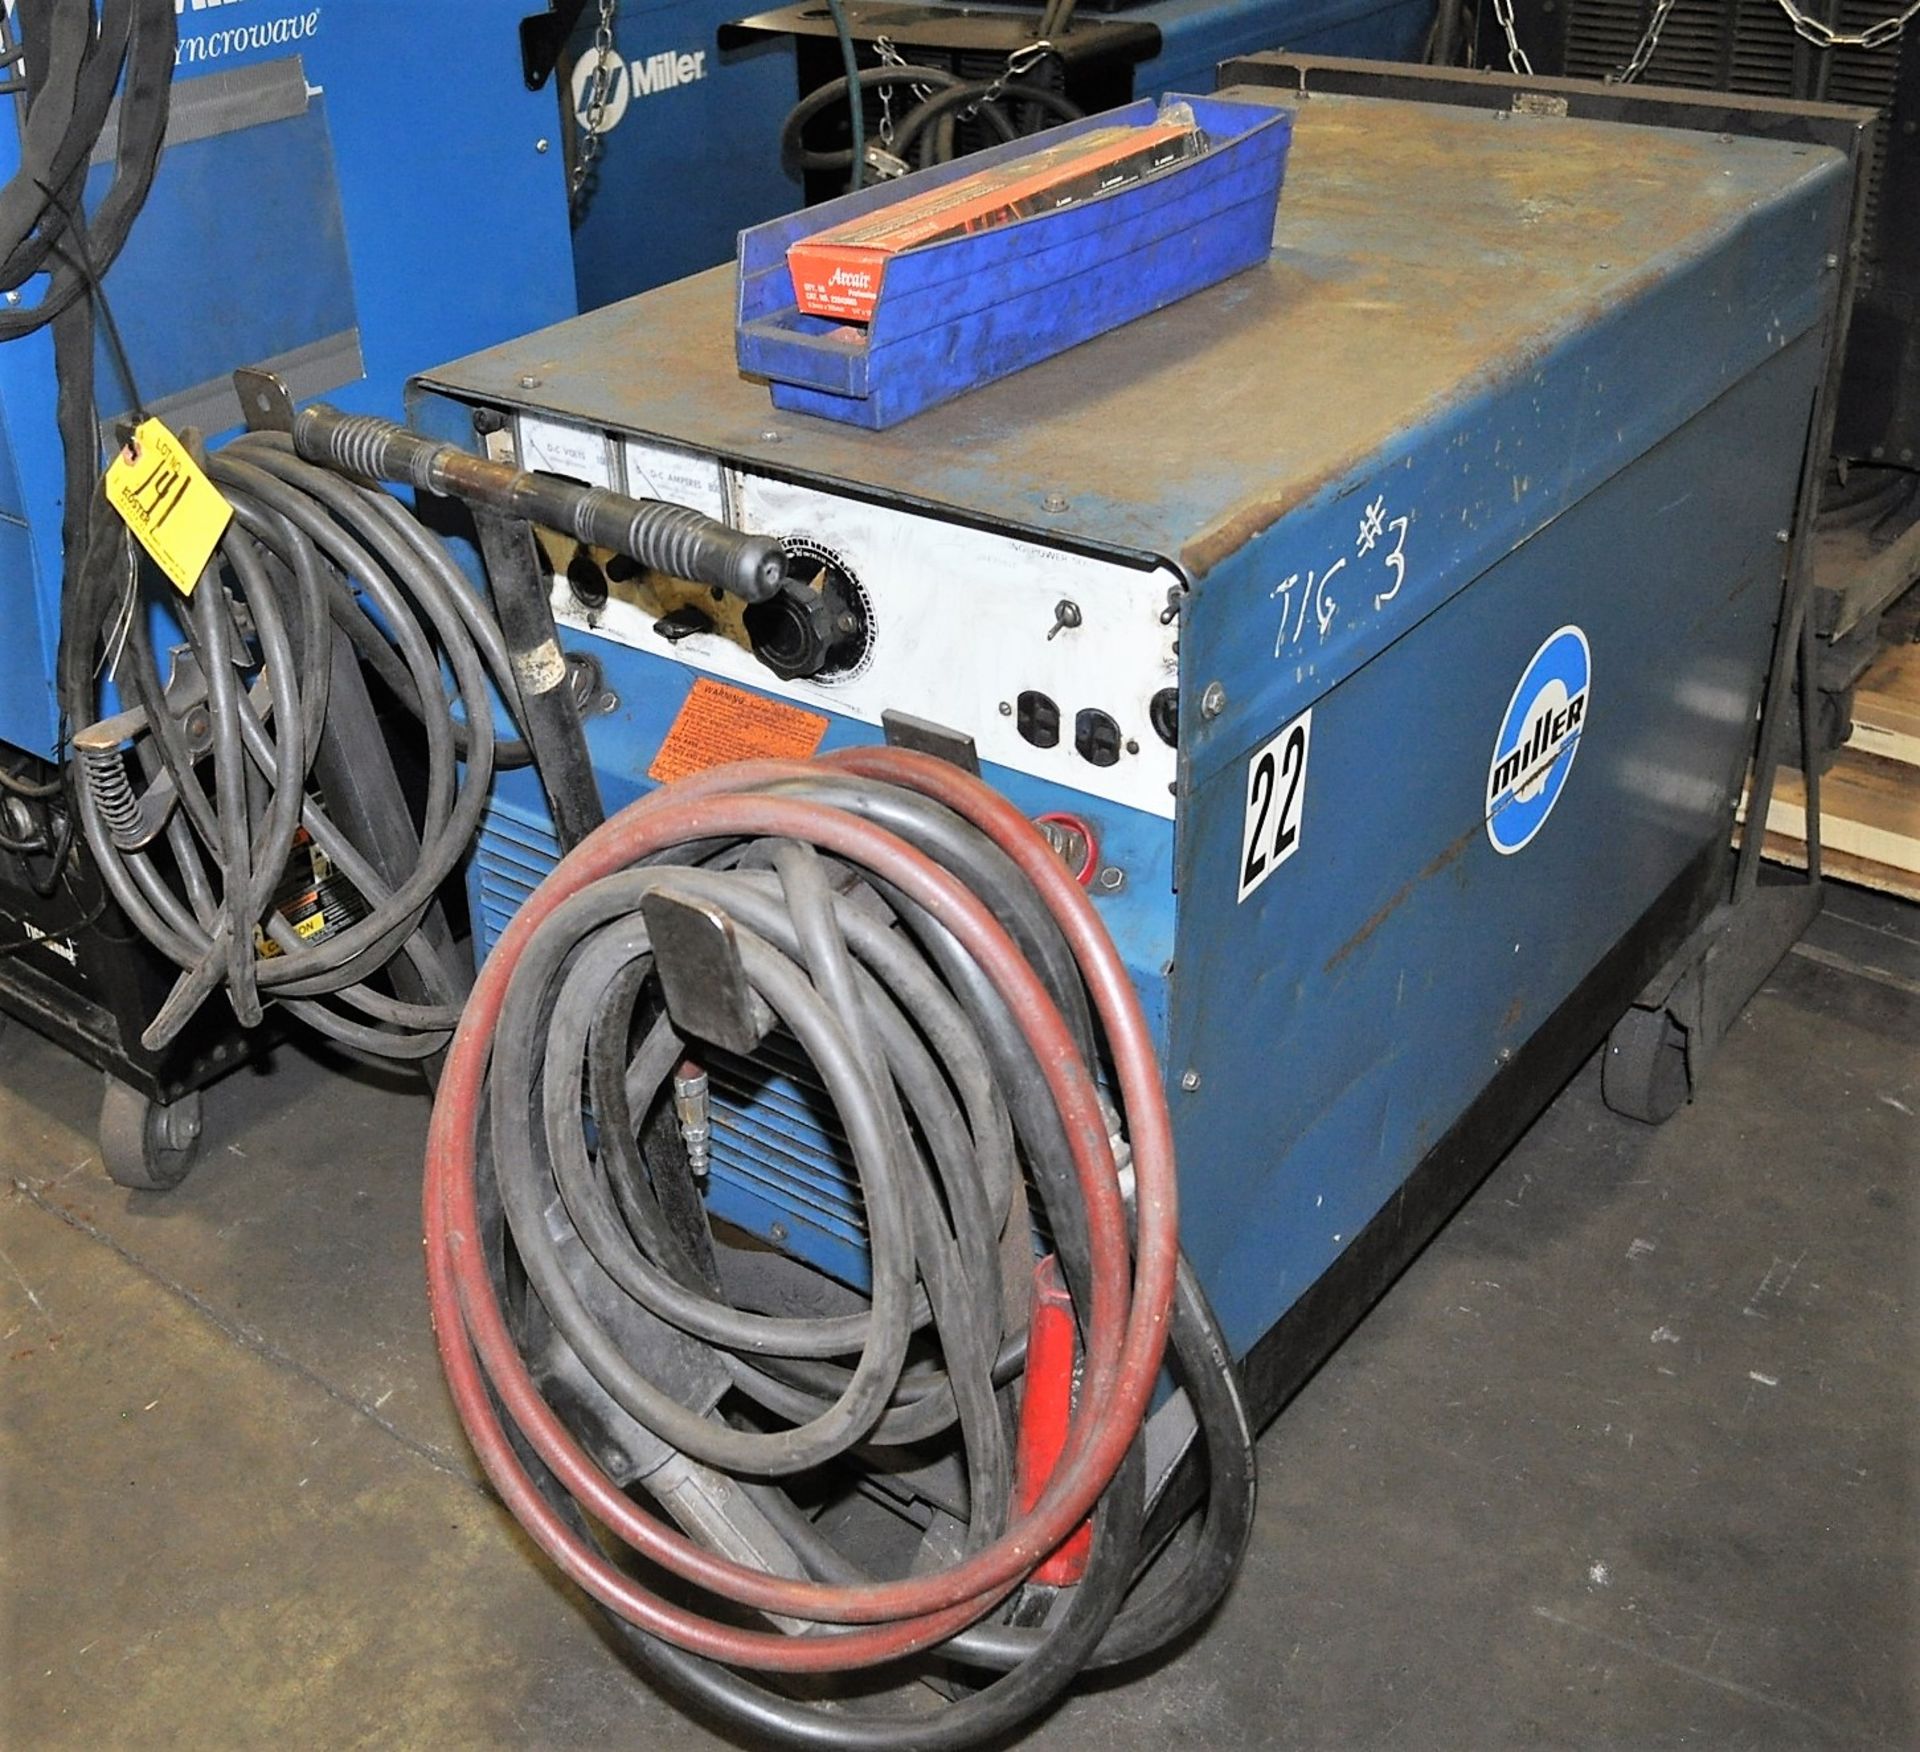 MILLER MDL. MP65E CONSTANT POTENTIAL DC WELDING POWER SOURCE, WITH AIR GAUGE GUN, S/N: JA43816 - Image 2 of 3